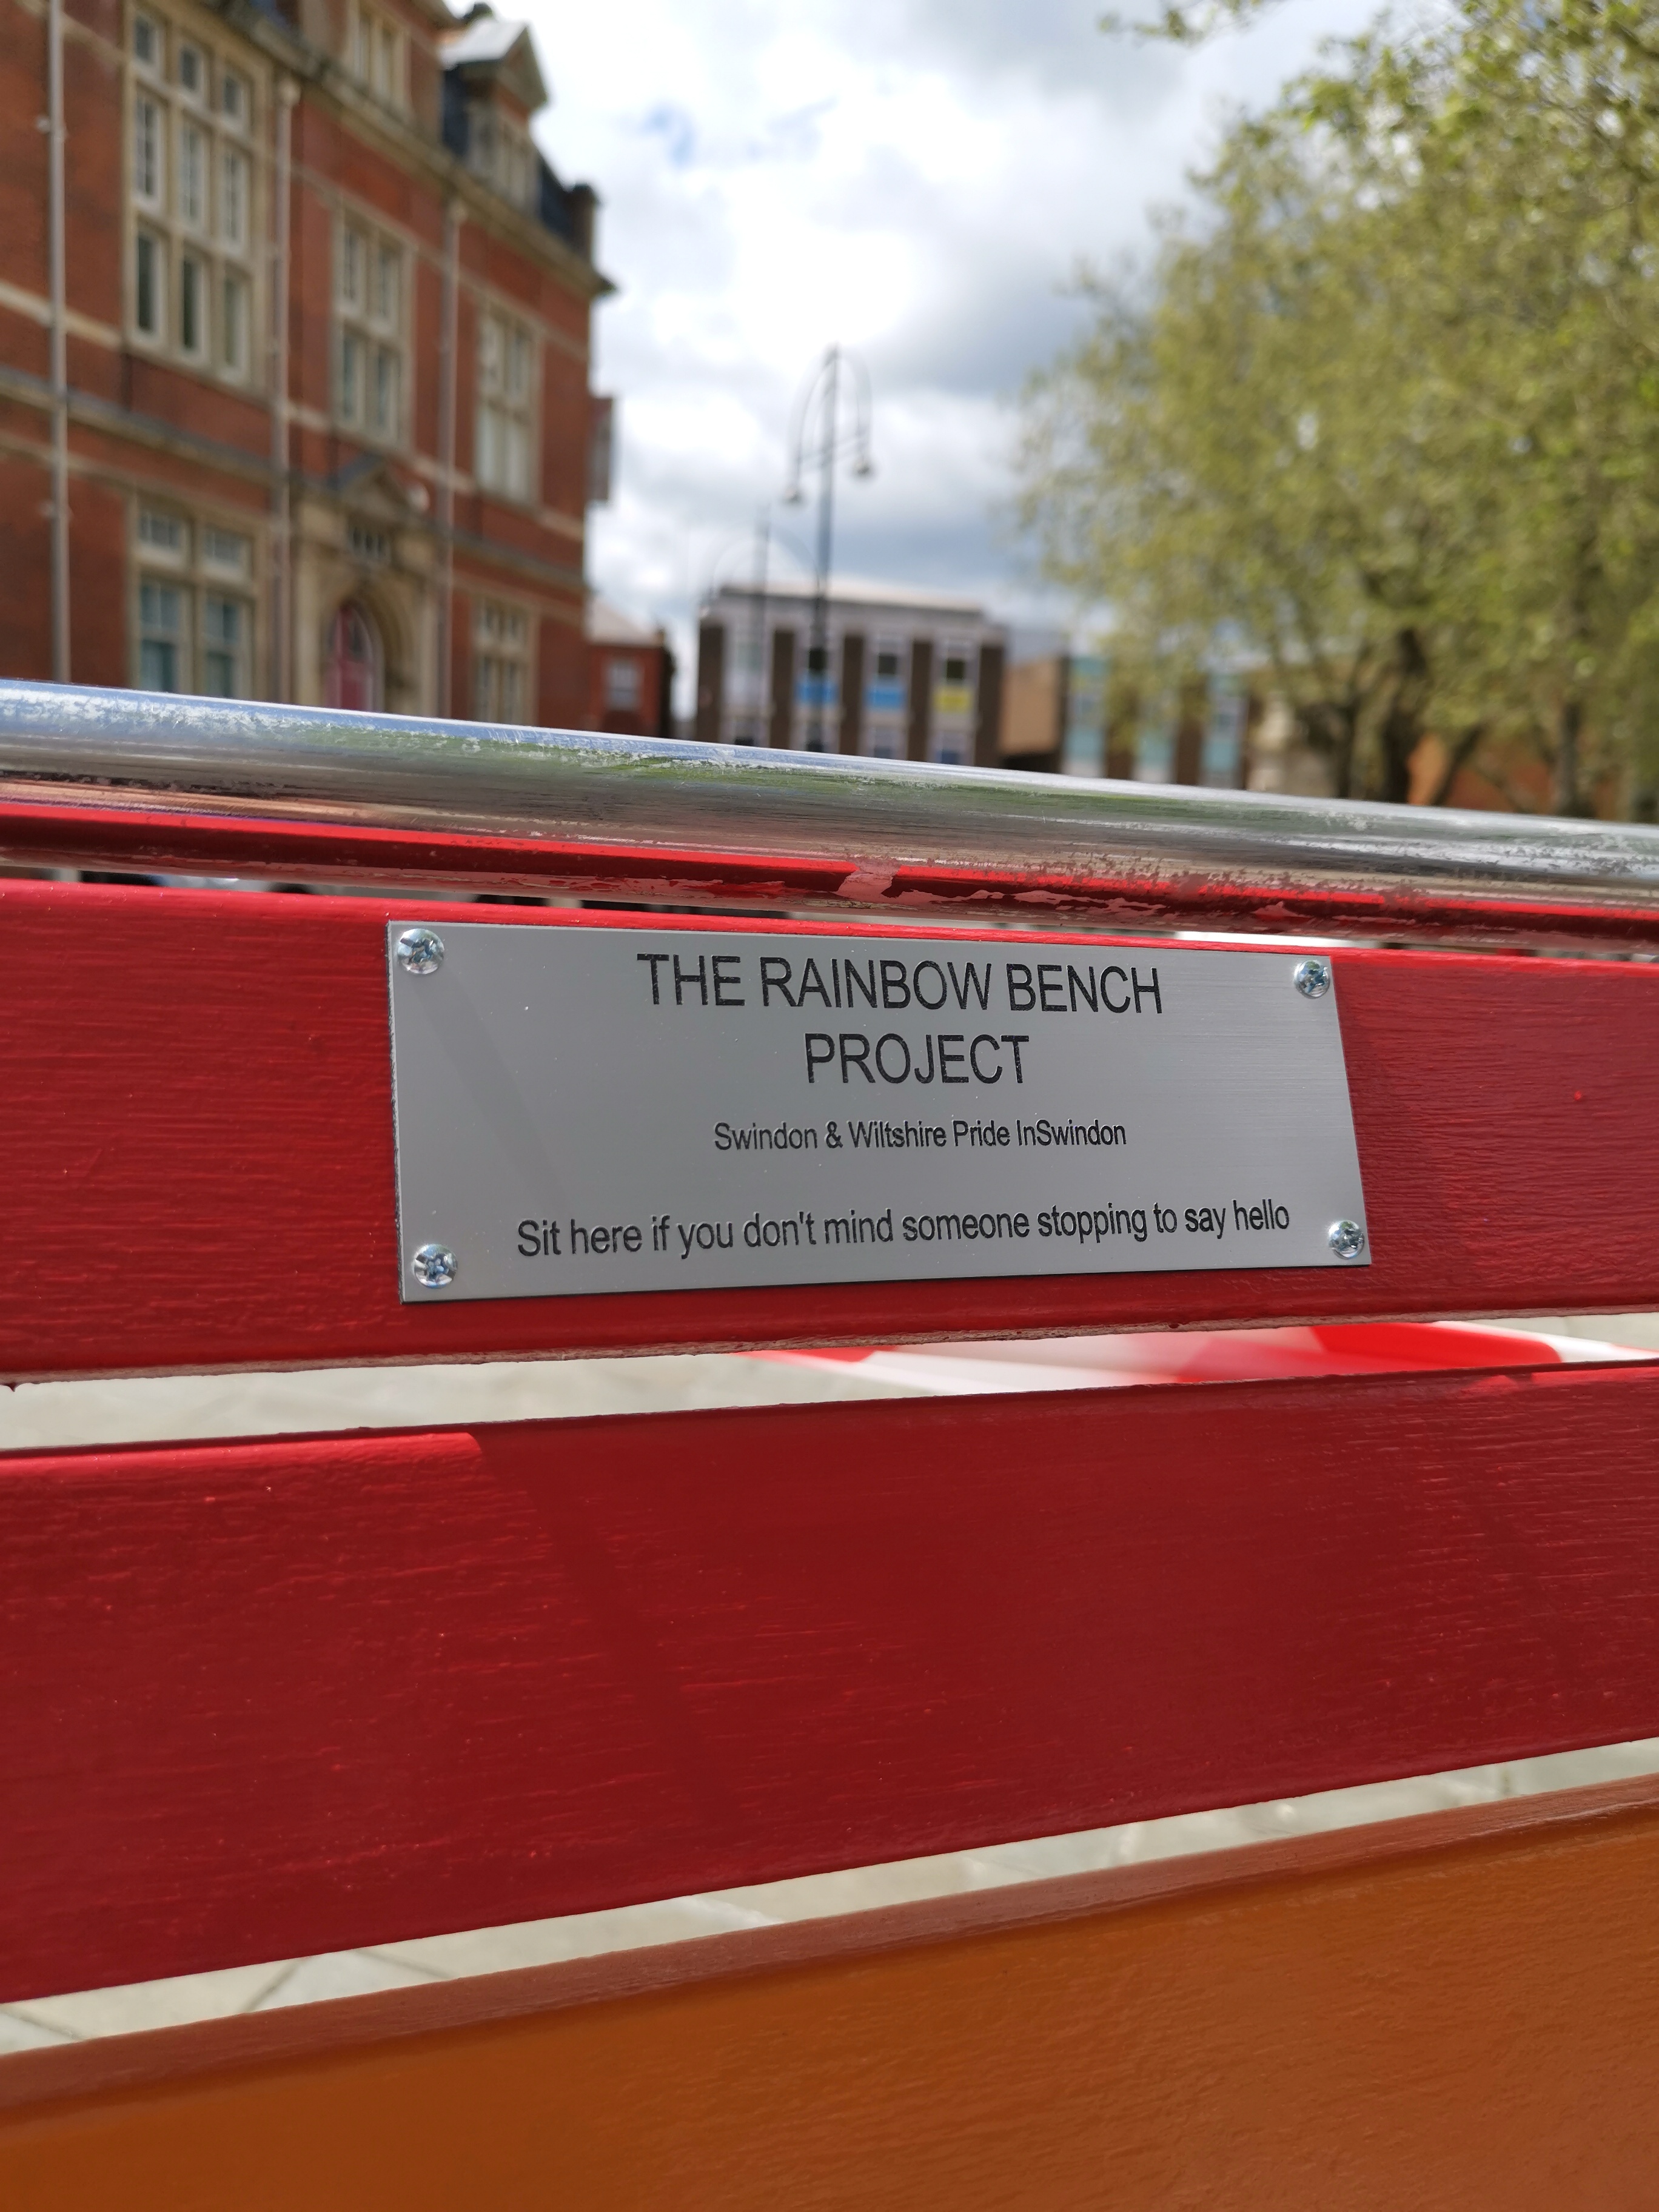 The Rainbow Bench Project launches in Swindon